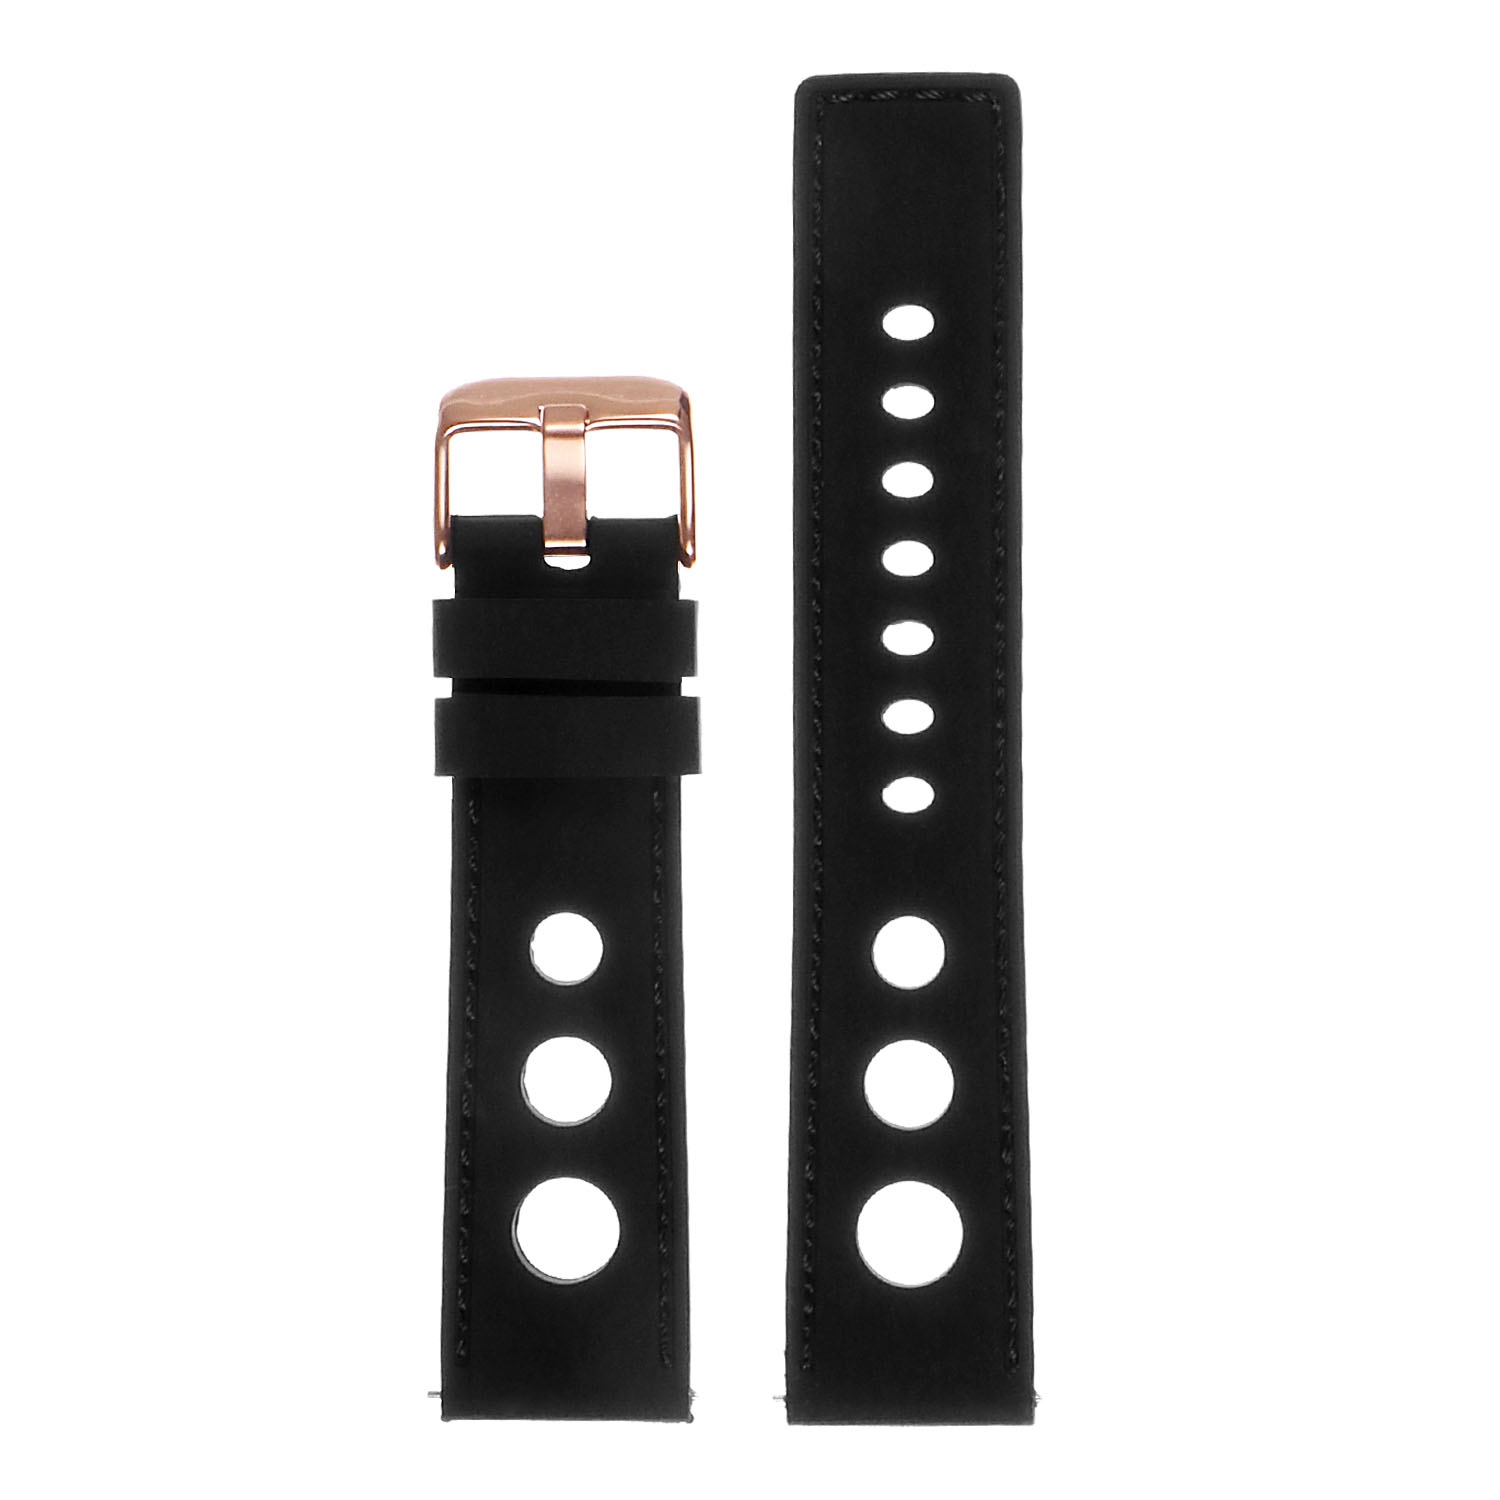 StrapsCo Silicone Rubber Rally Watch Band Strap for Michael Kors MKGO Watch - Black (Rose Gold Buckle)